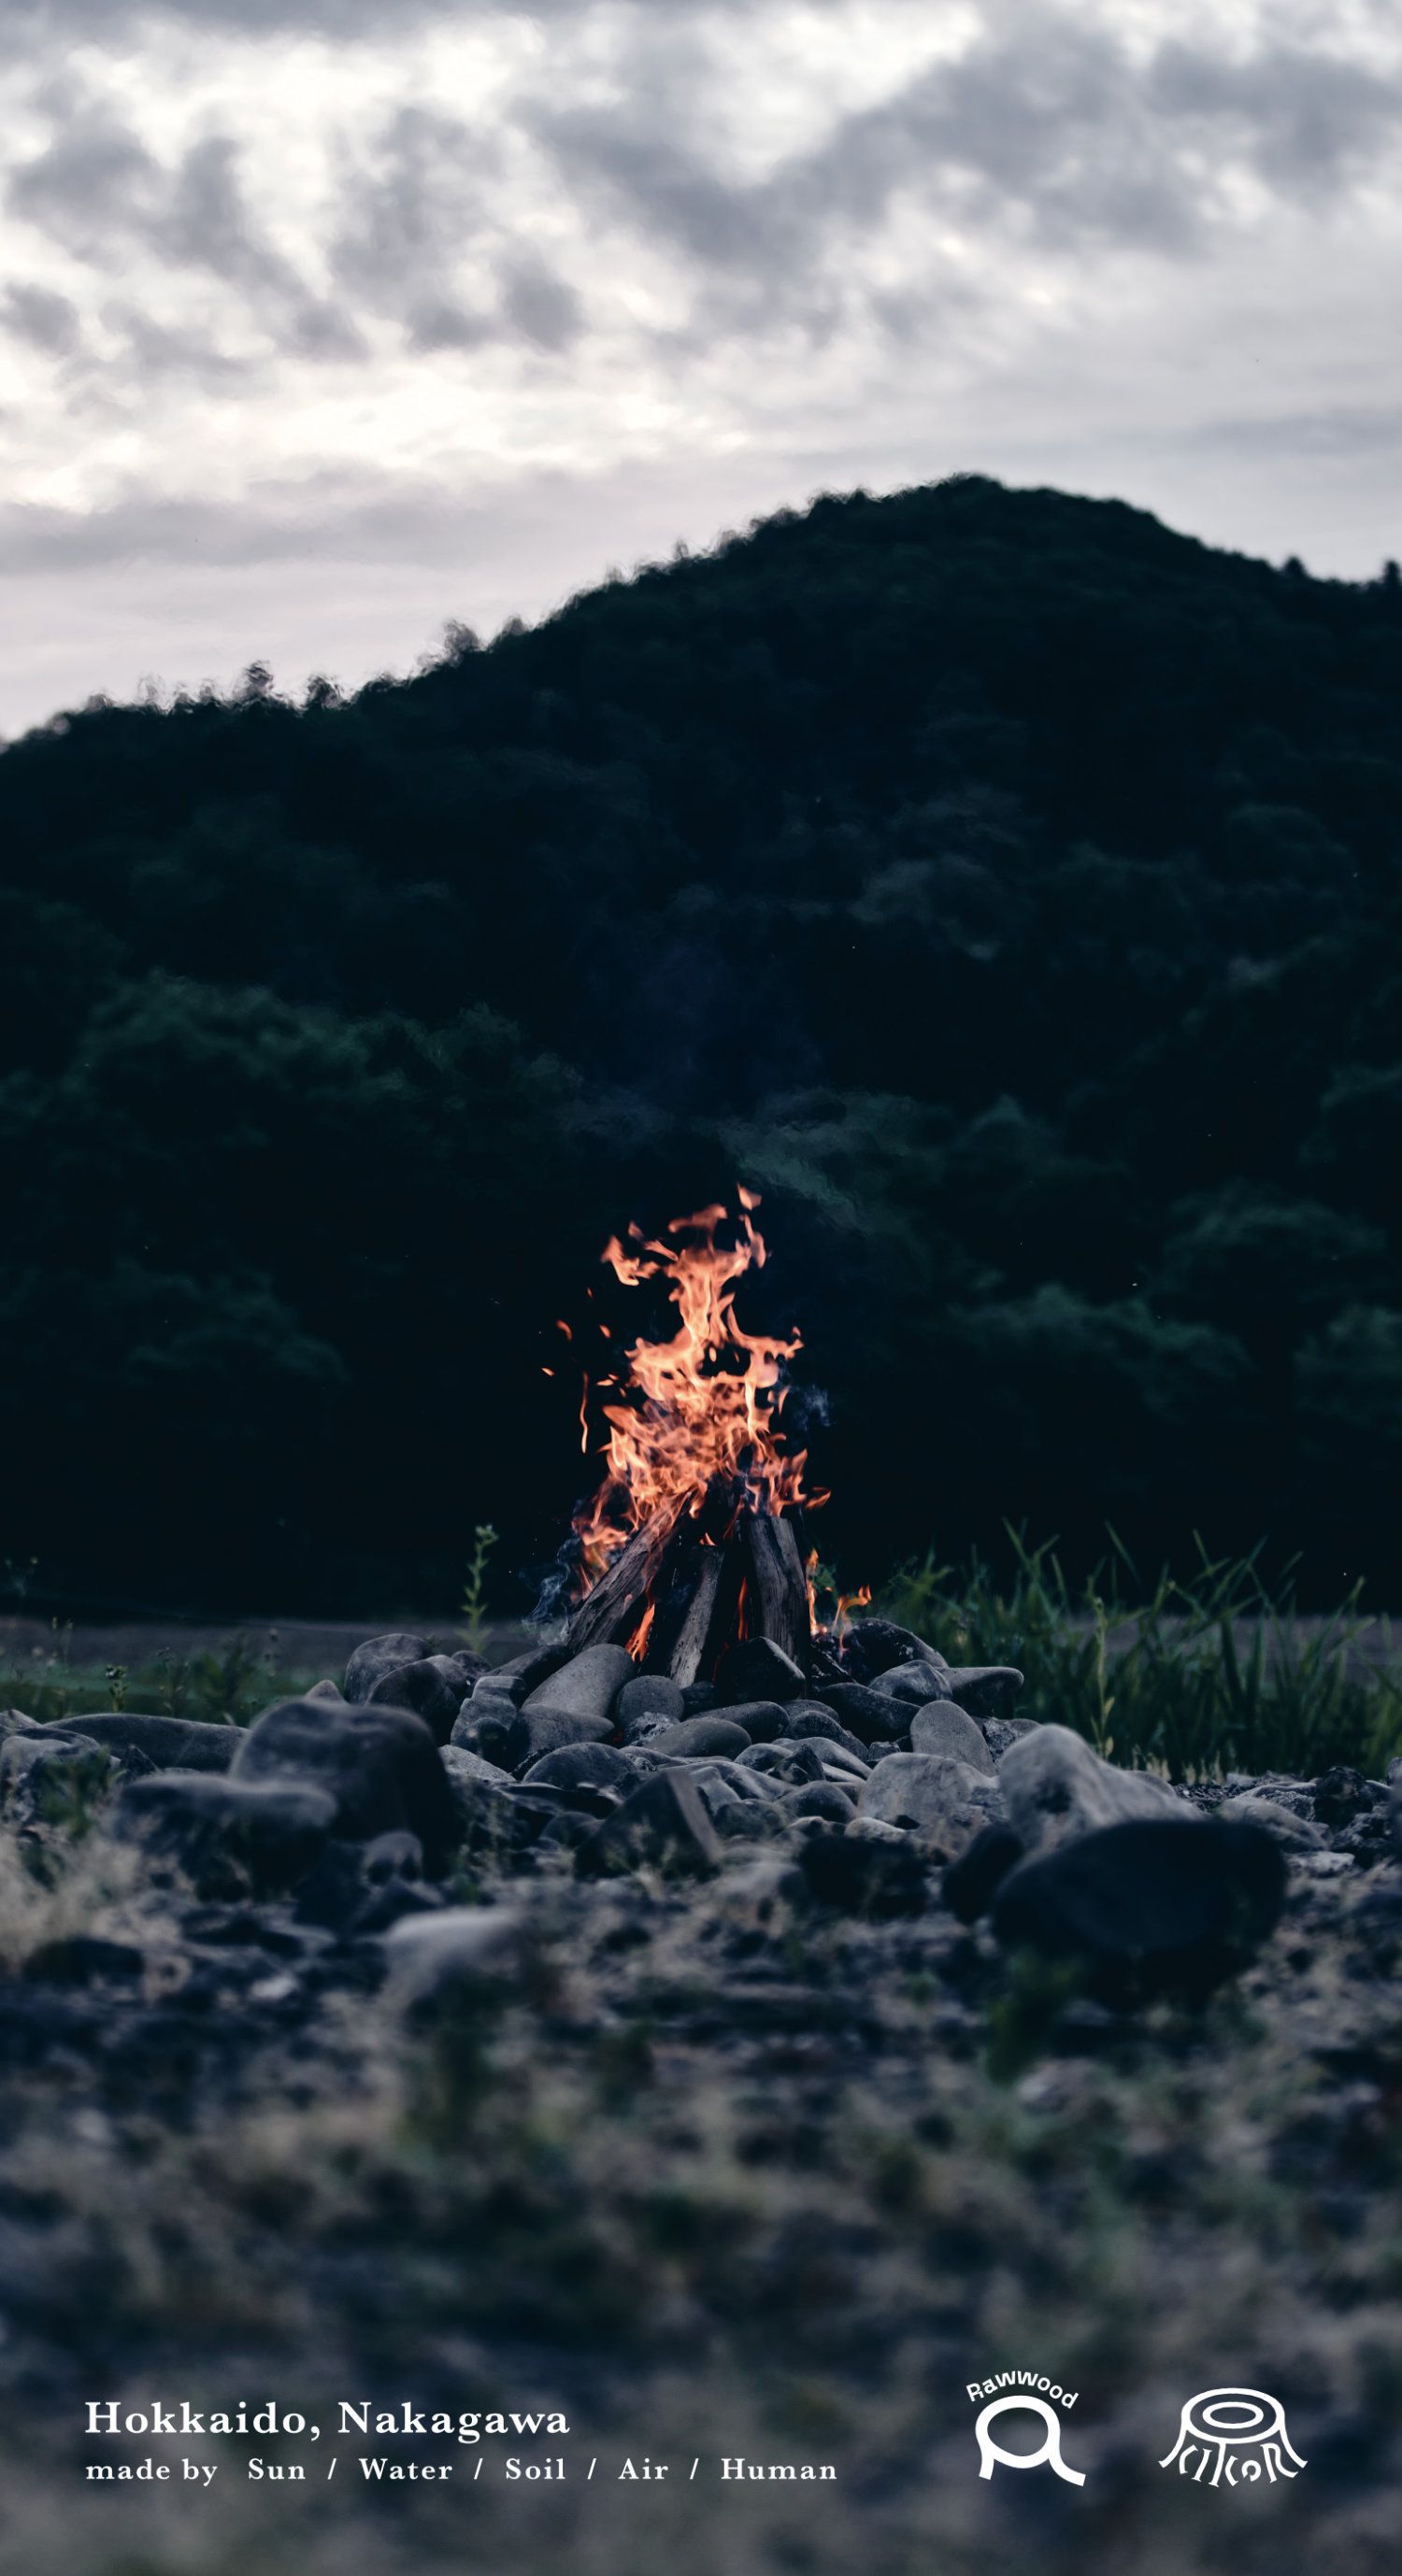 A small campfire burns in the middle of a rocky field. - Camping